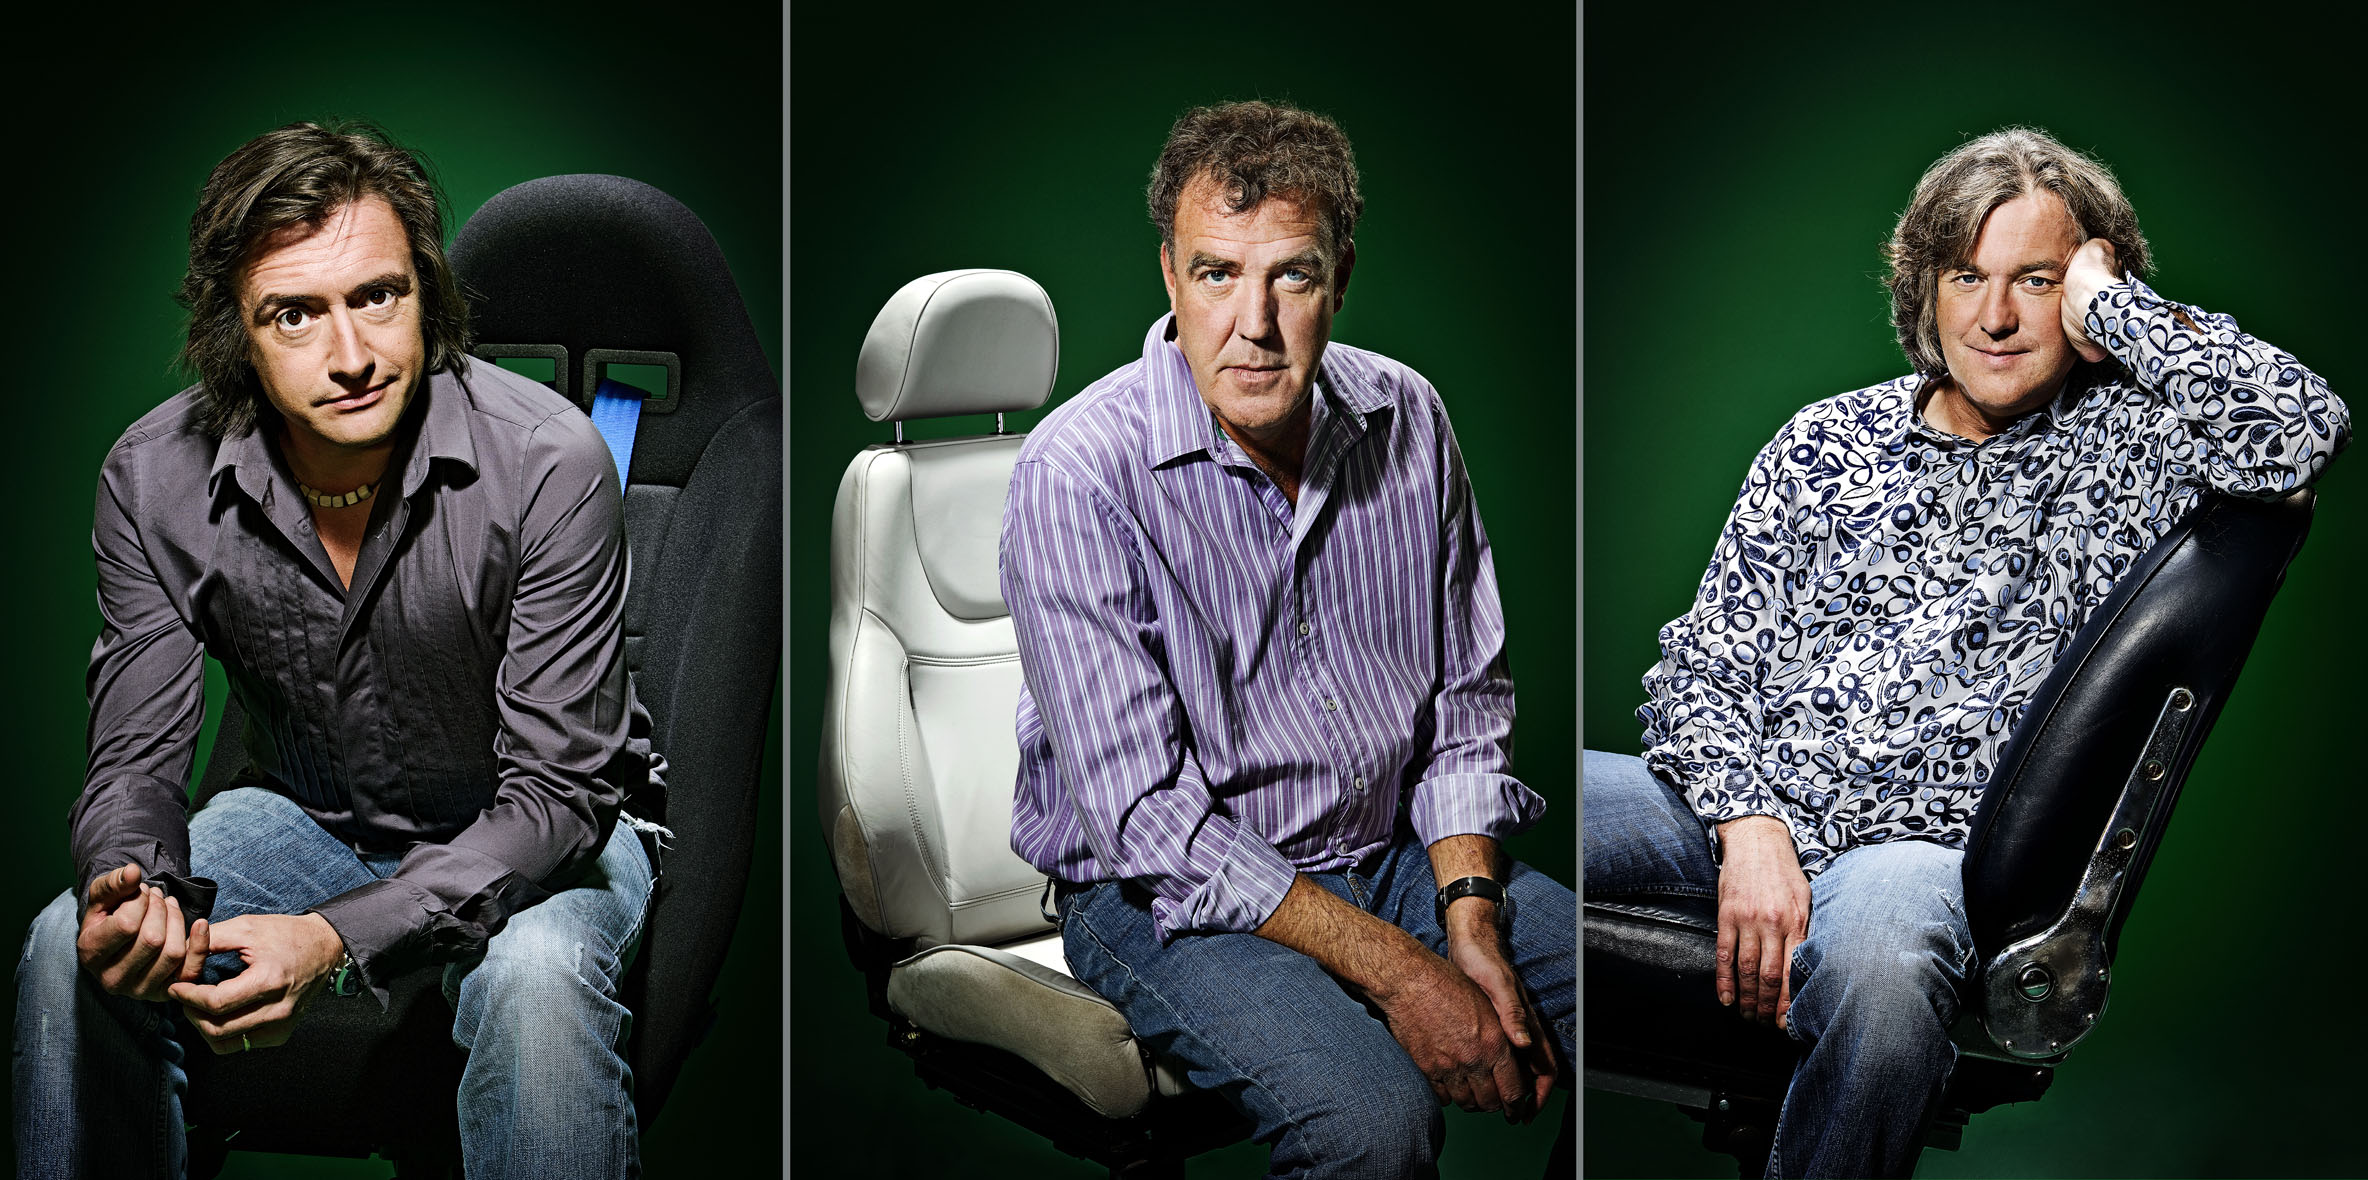 Actually in the first season of remade Top Gear in 2002, Jason Dawe was the original third presenter. However in the second season, he was replaced by James May.